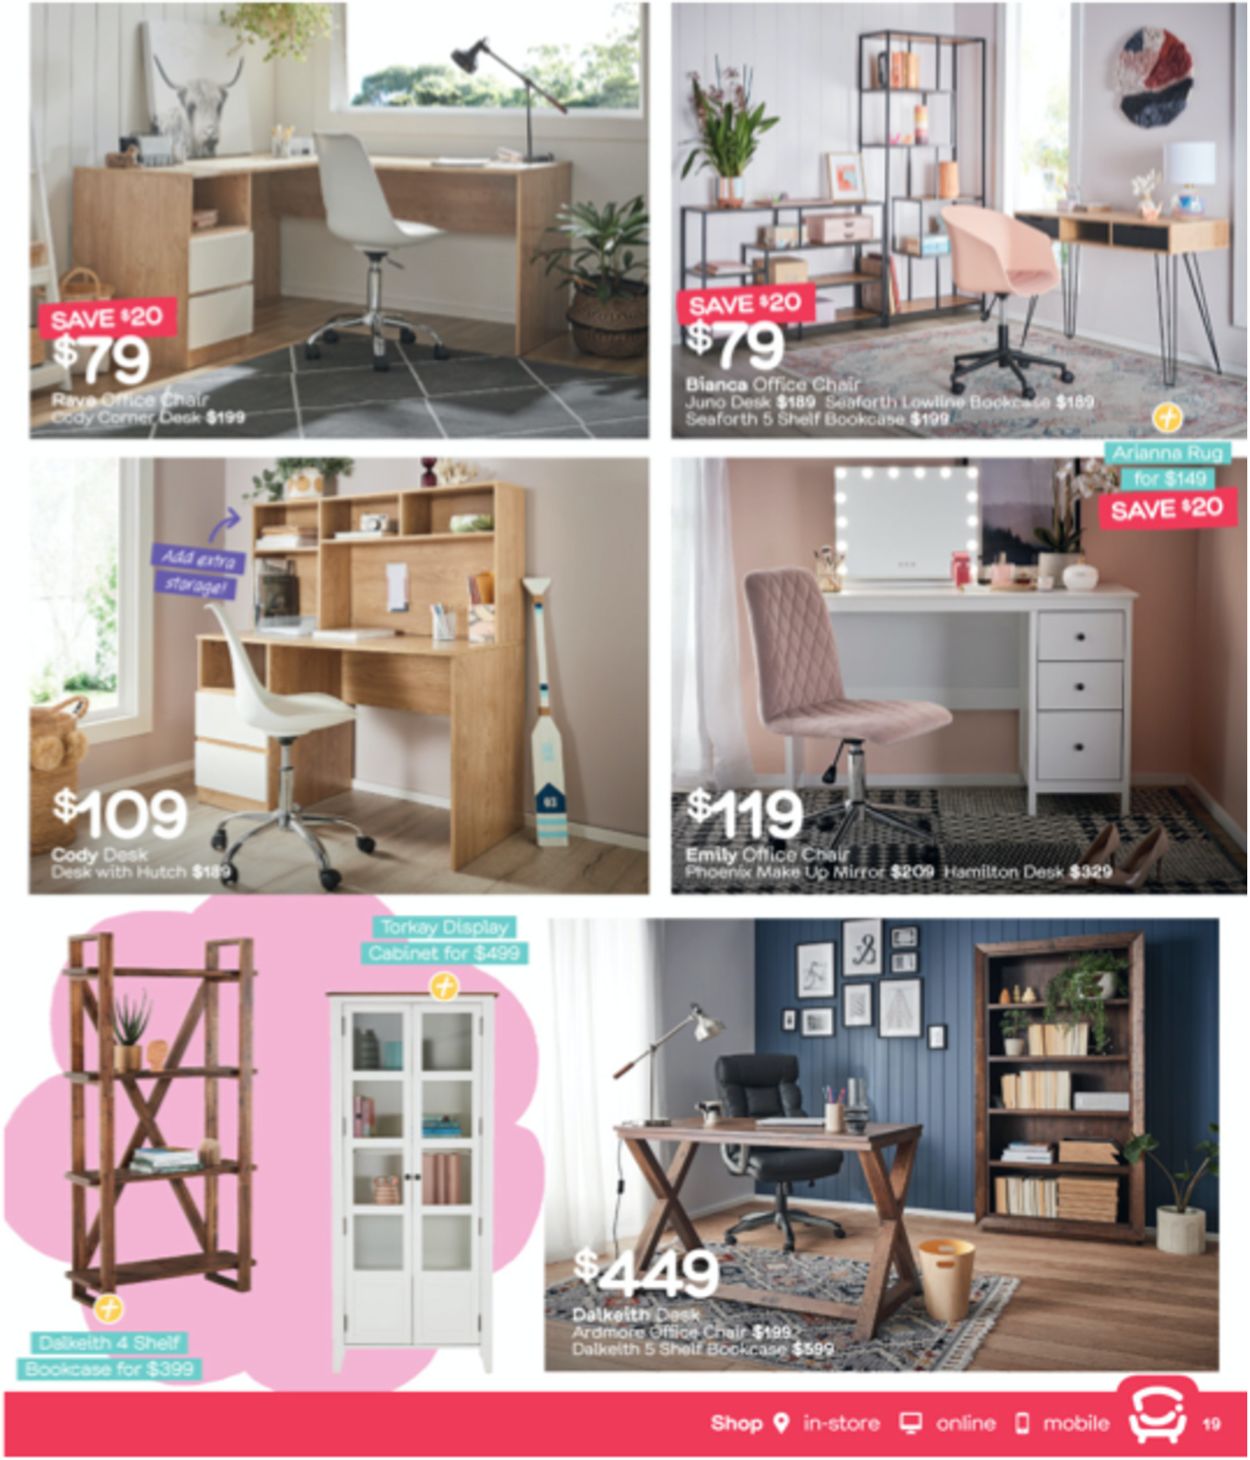 Fantastic Furniture Catalogue from 23/12/2021